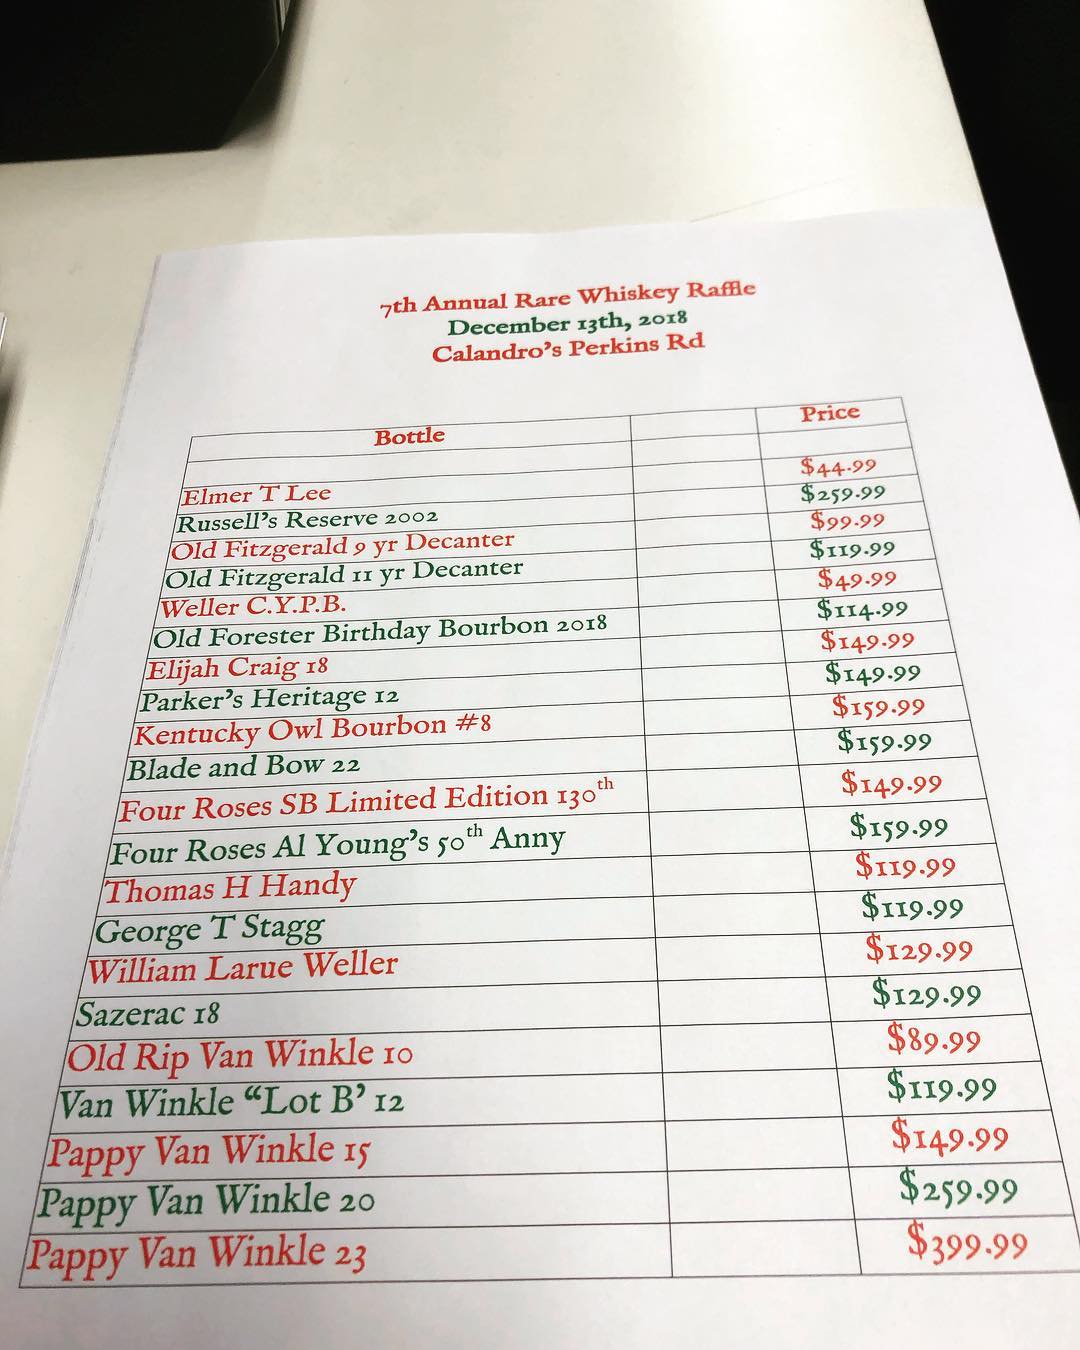 Everyone loves a good list right? Here’s the lineup for the 7th Annual Rare Whiskey…